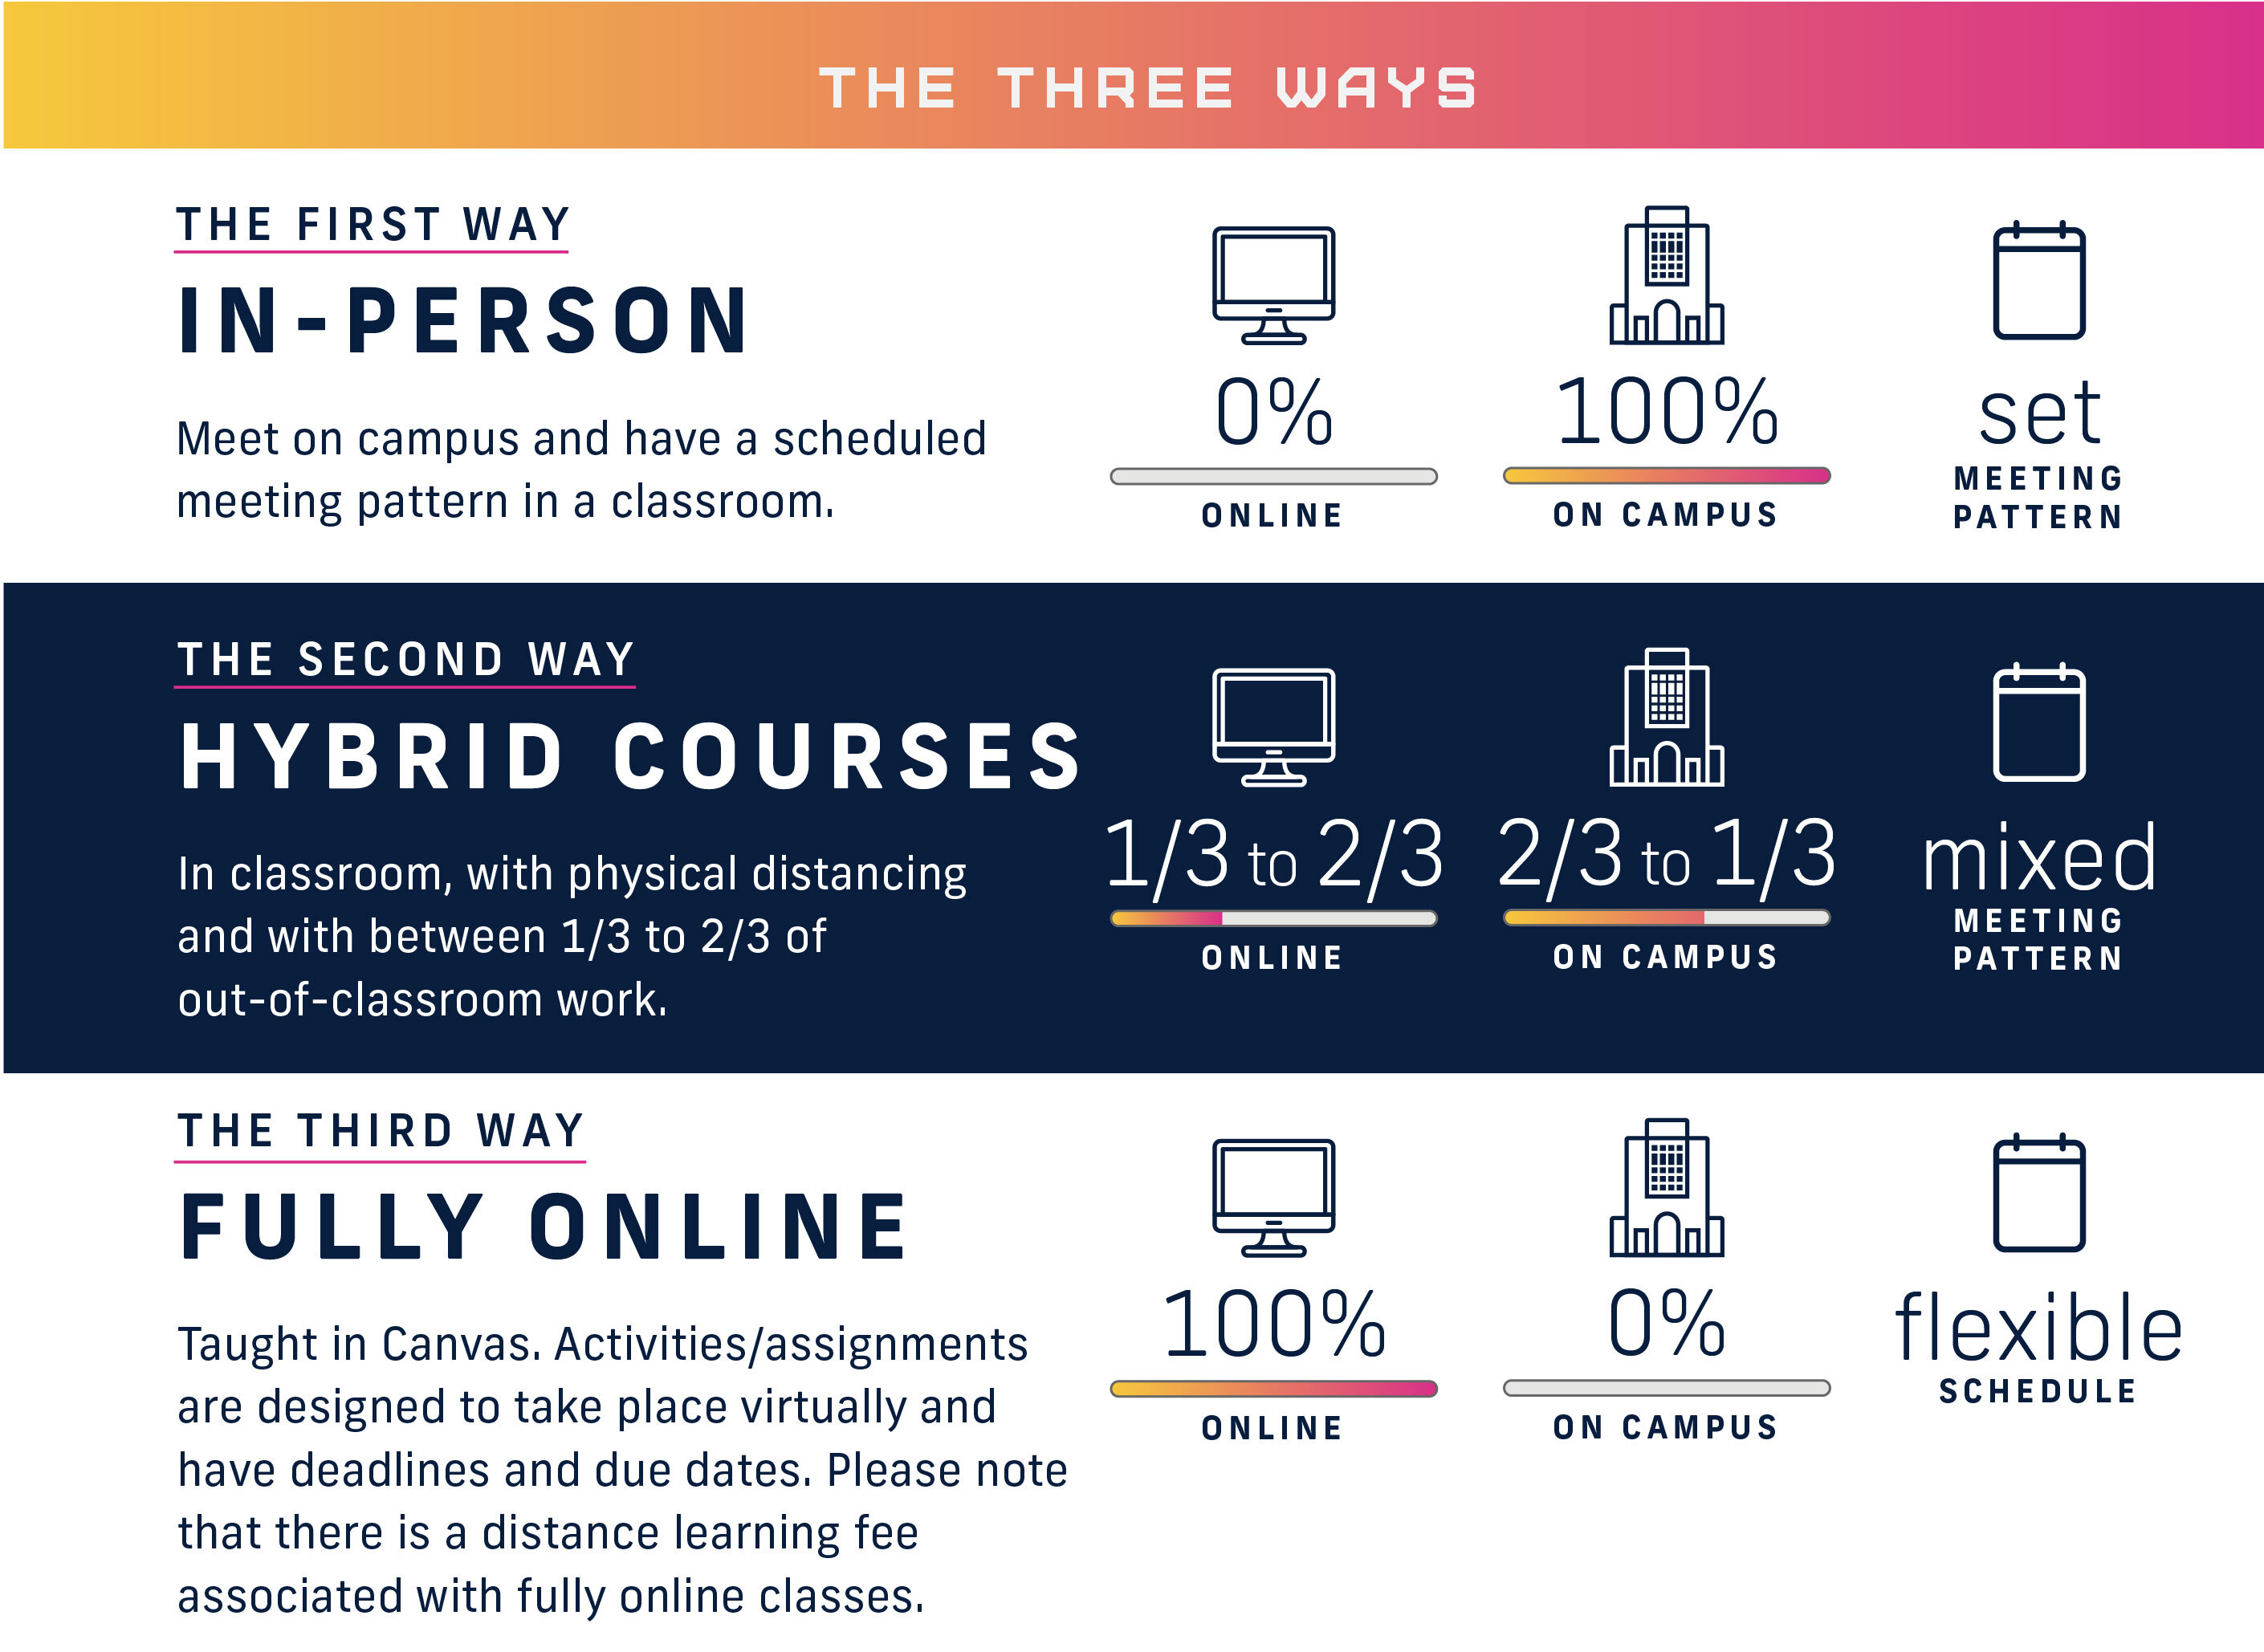 The 4 ways: In-person, hybrid courses, remote, fully online